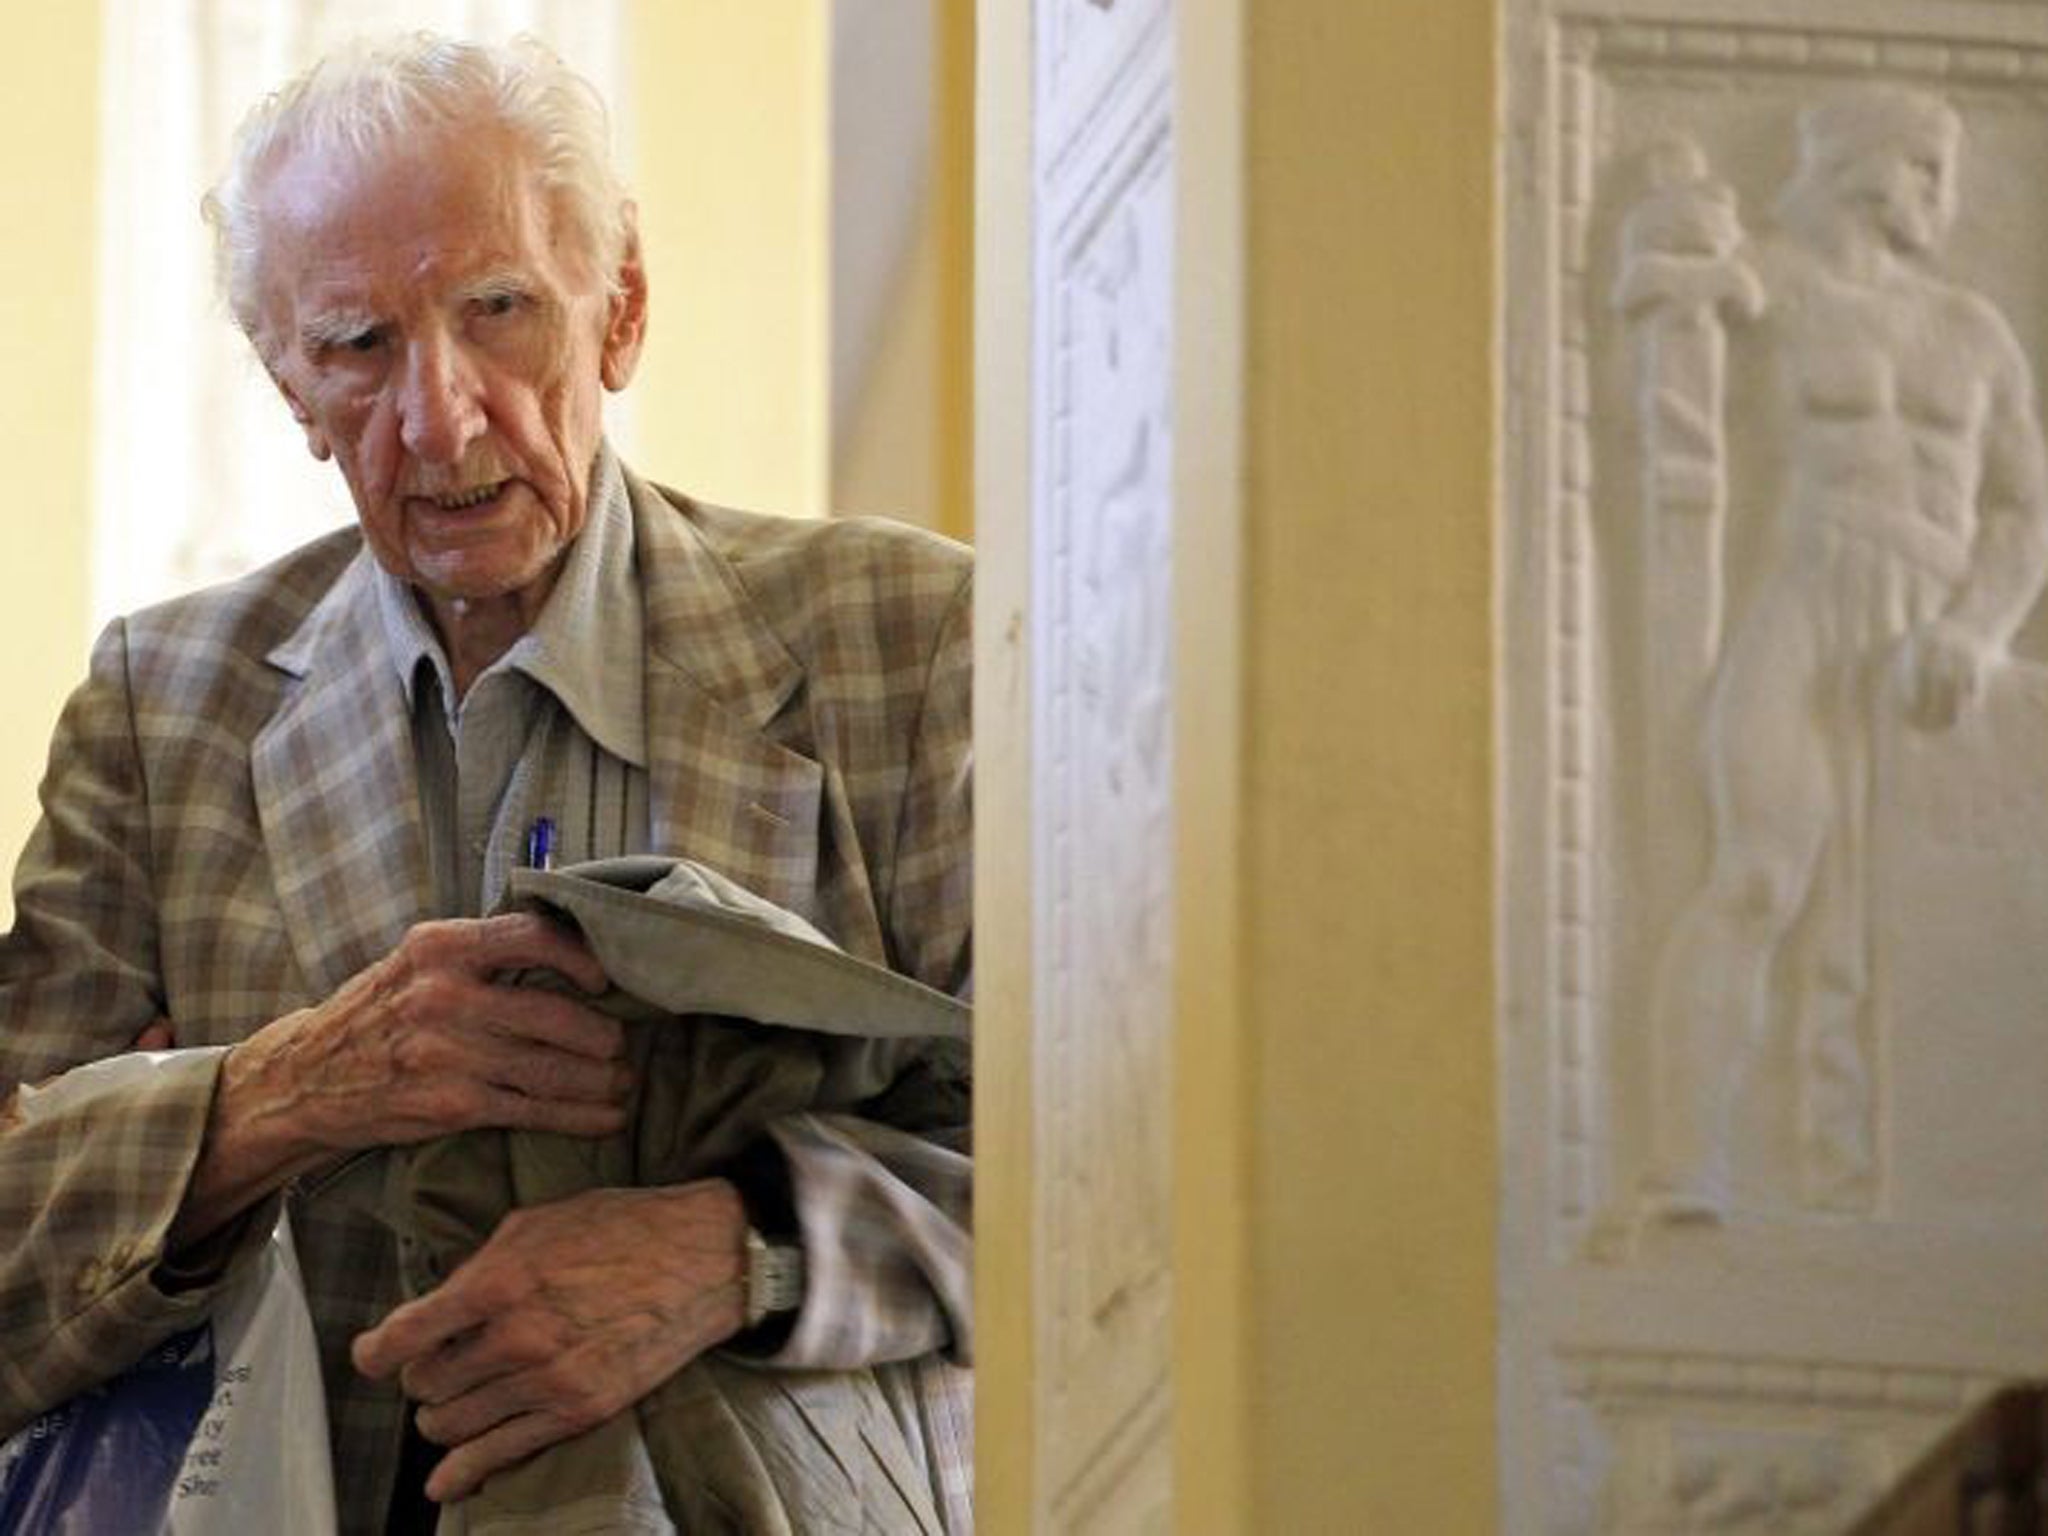 98-year-old Laszlo Csatary was accused of assisting in the murder of 15,700 Jews during Second World War